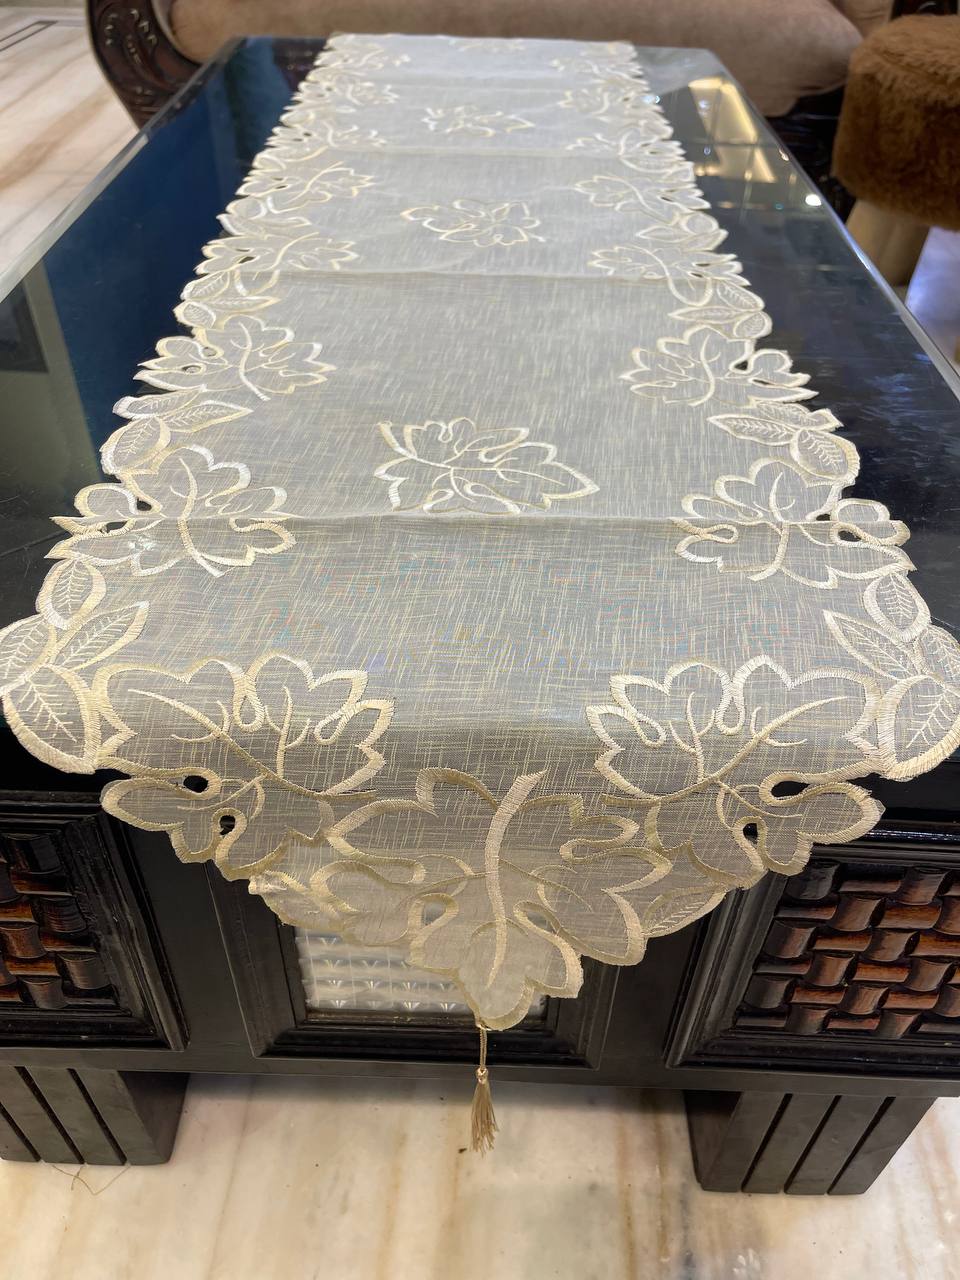 loomsmith-tissue-embroidered-table-runner-with-leaves-embroidered-borders-with-a-tassel-floral-embroidered-for-dining-table